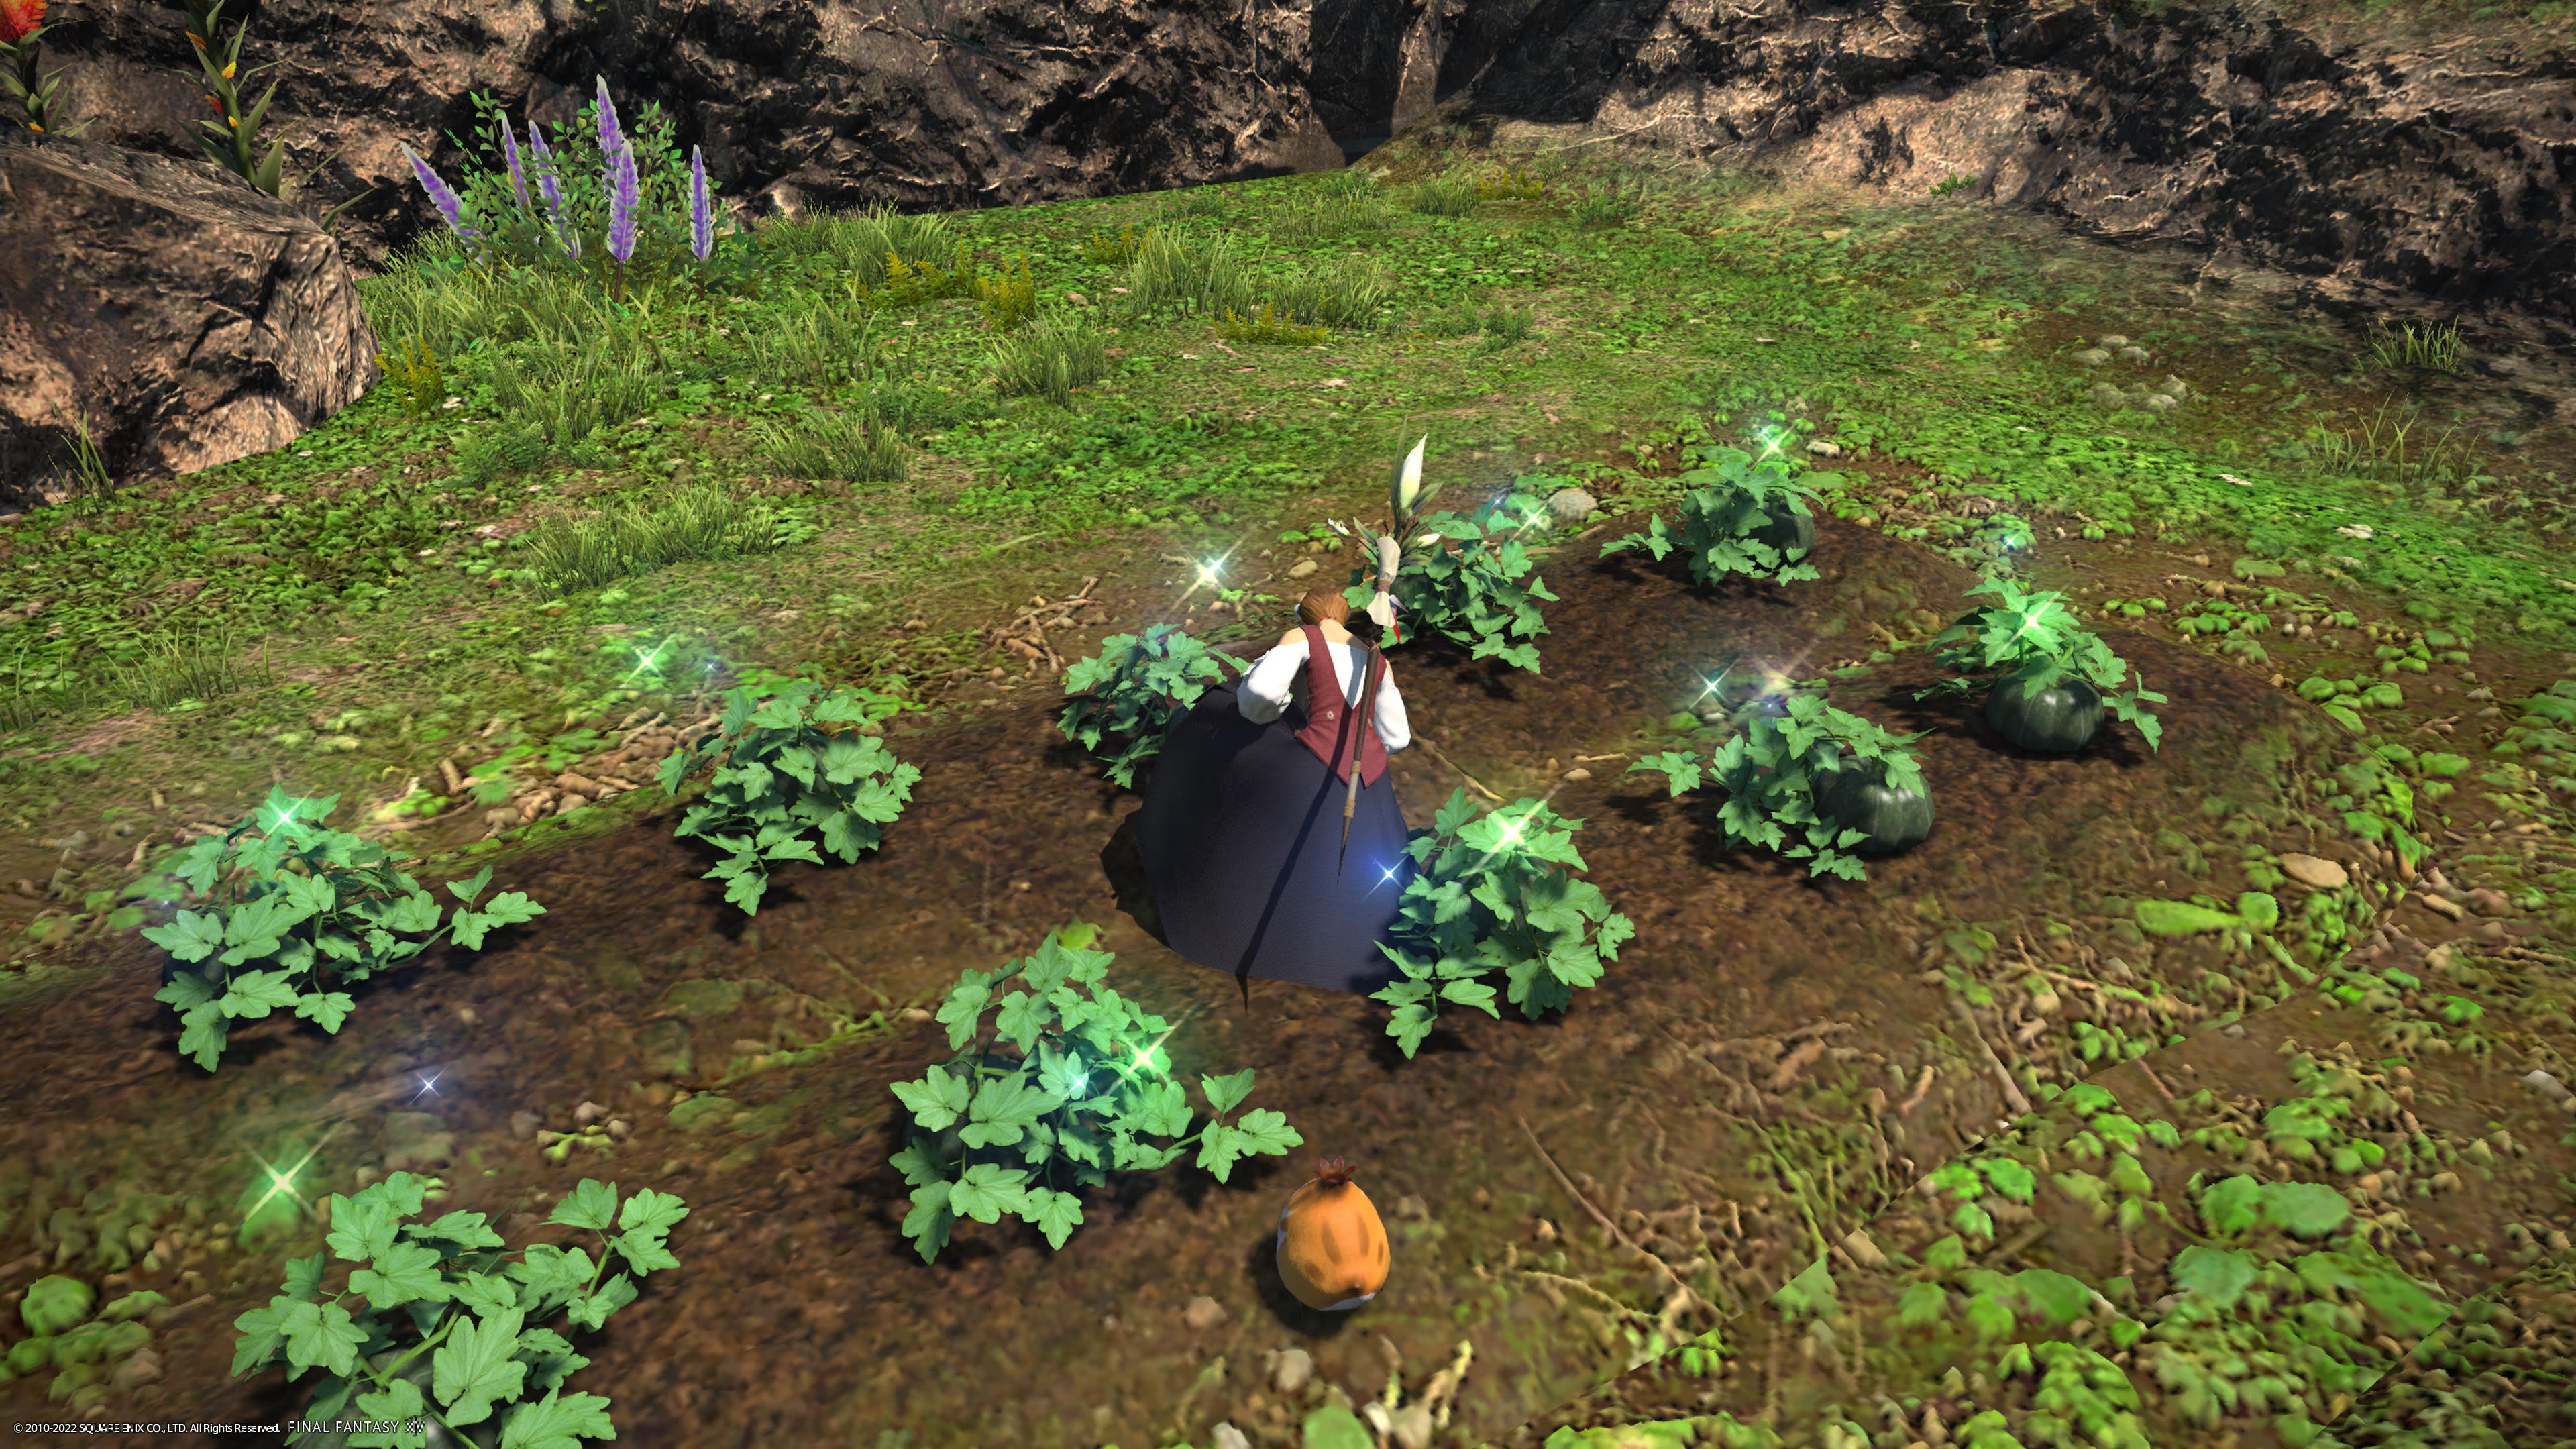 The player tends to a row of plants in a garden in Final Fantasy XIV's Island Sanctuary